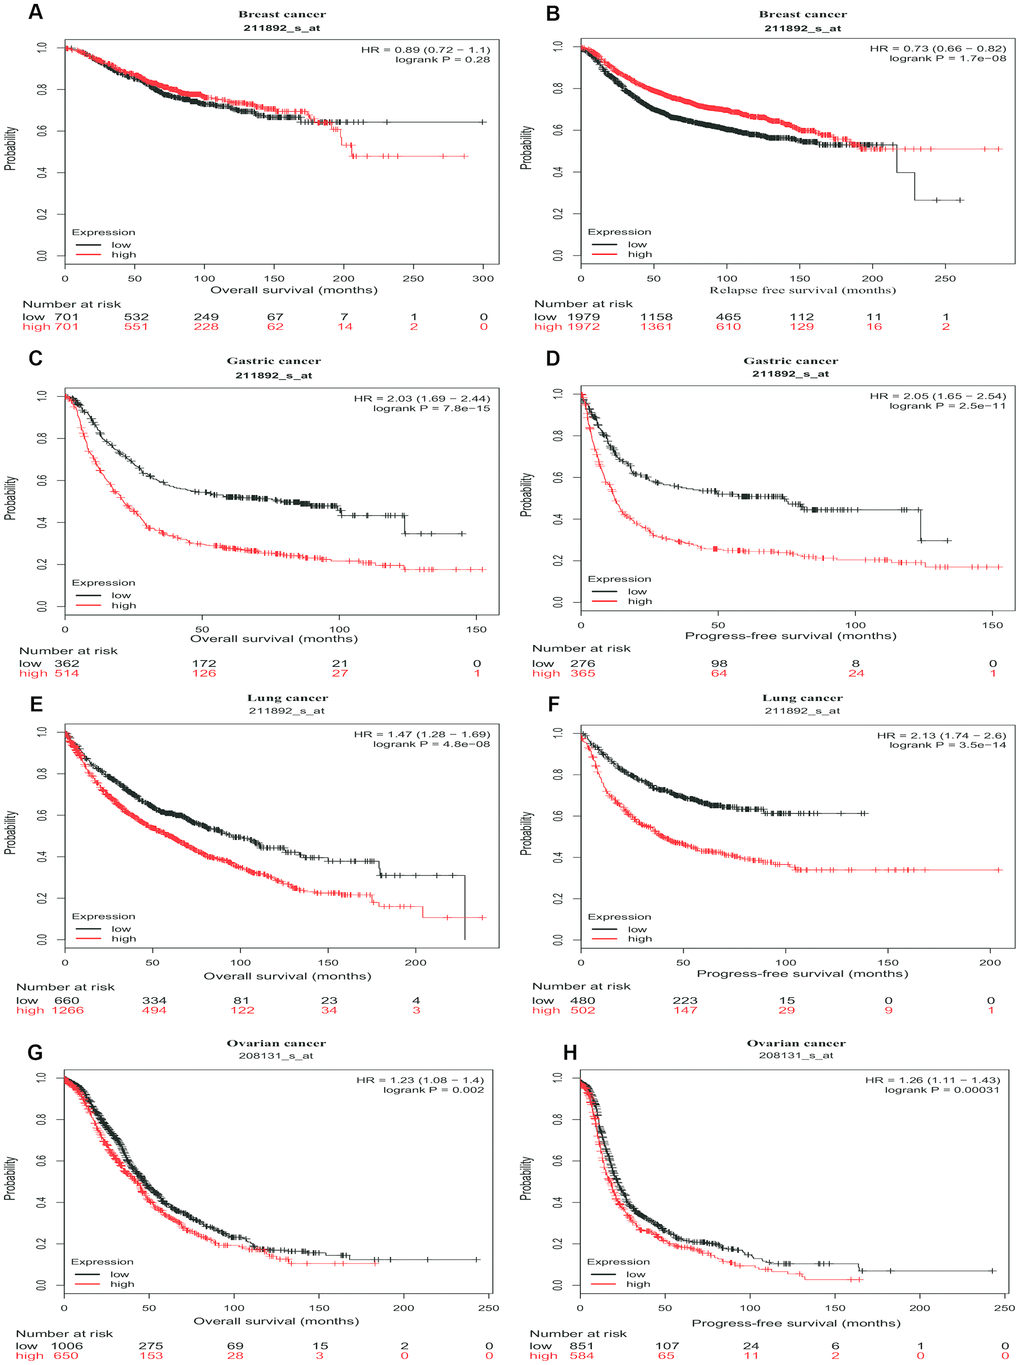 Survival curves of high or low expression of PTGIS in different tumors from Kaplan-Meier plotter. (A, B) OS and DFS survival curves of breast cancer (n = 1,402 and n = 3,951, respectively). (C, D) OS and PFS survival curves of gastric cancer (n = 876 and n = 641, respectively). (E, F) OS and PFS survival curves of lung cancer (n = 1,926 and n = 982, respectively). (G, H) OS and PFS survival curves of ovarian cancer (n = 1,656 and n = 1,435, respectively). OS, overall survival; PFS, progression-free survival; DFS, disease-free survival.